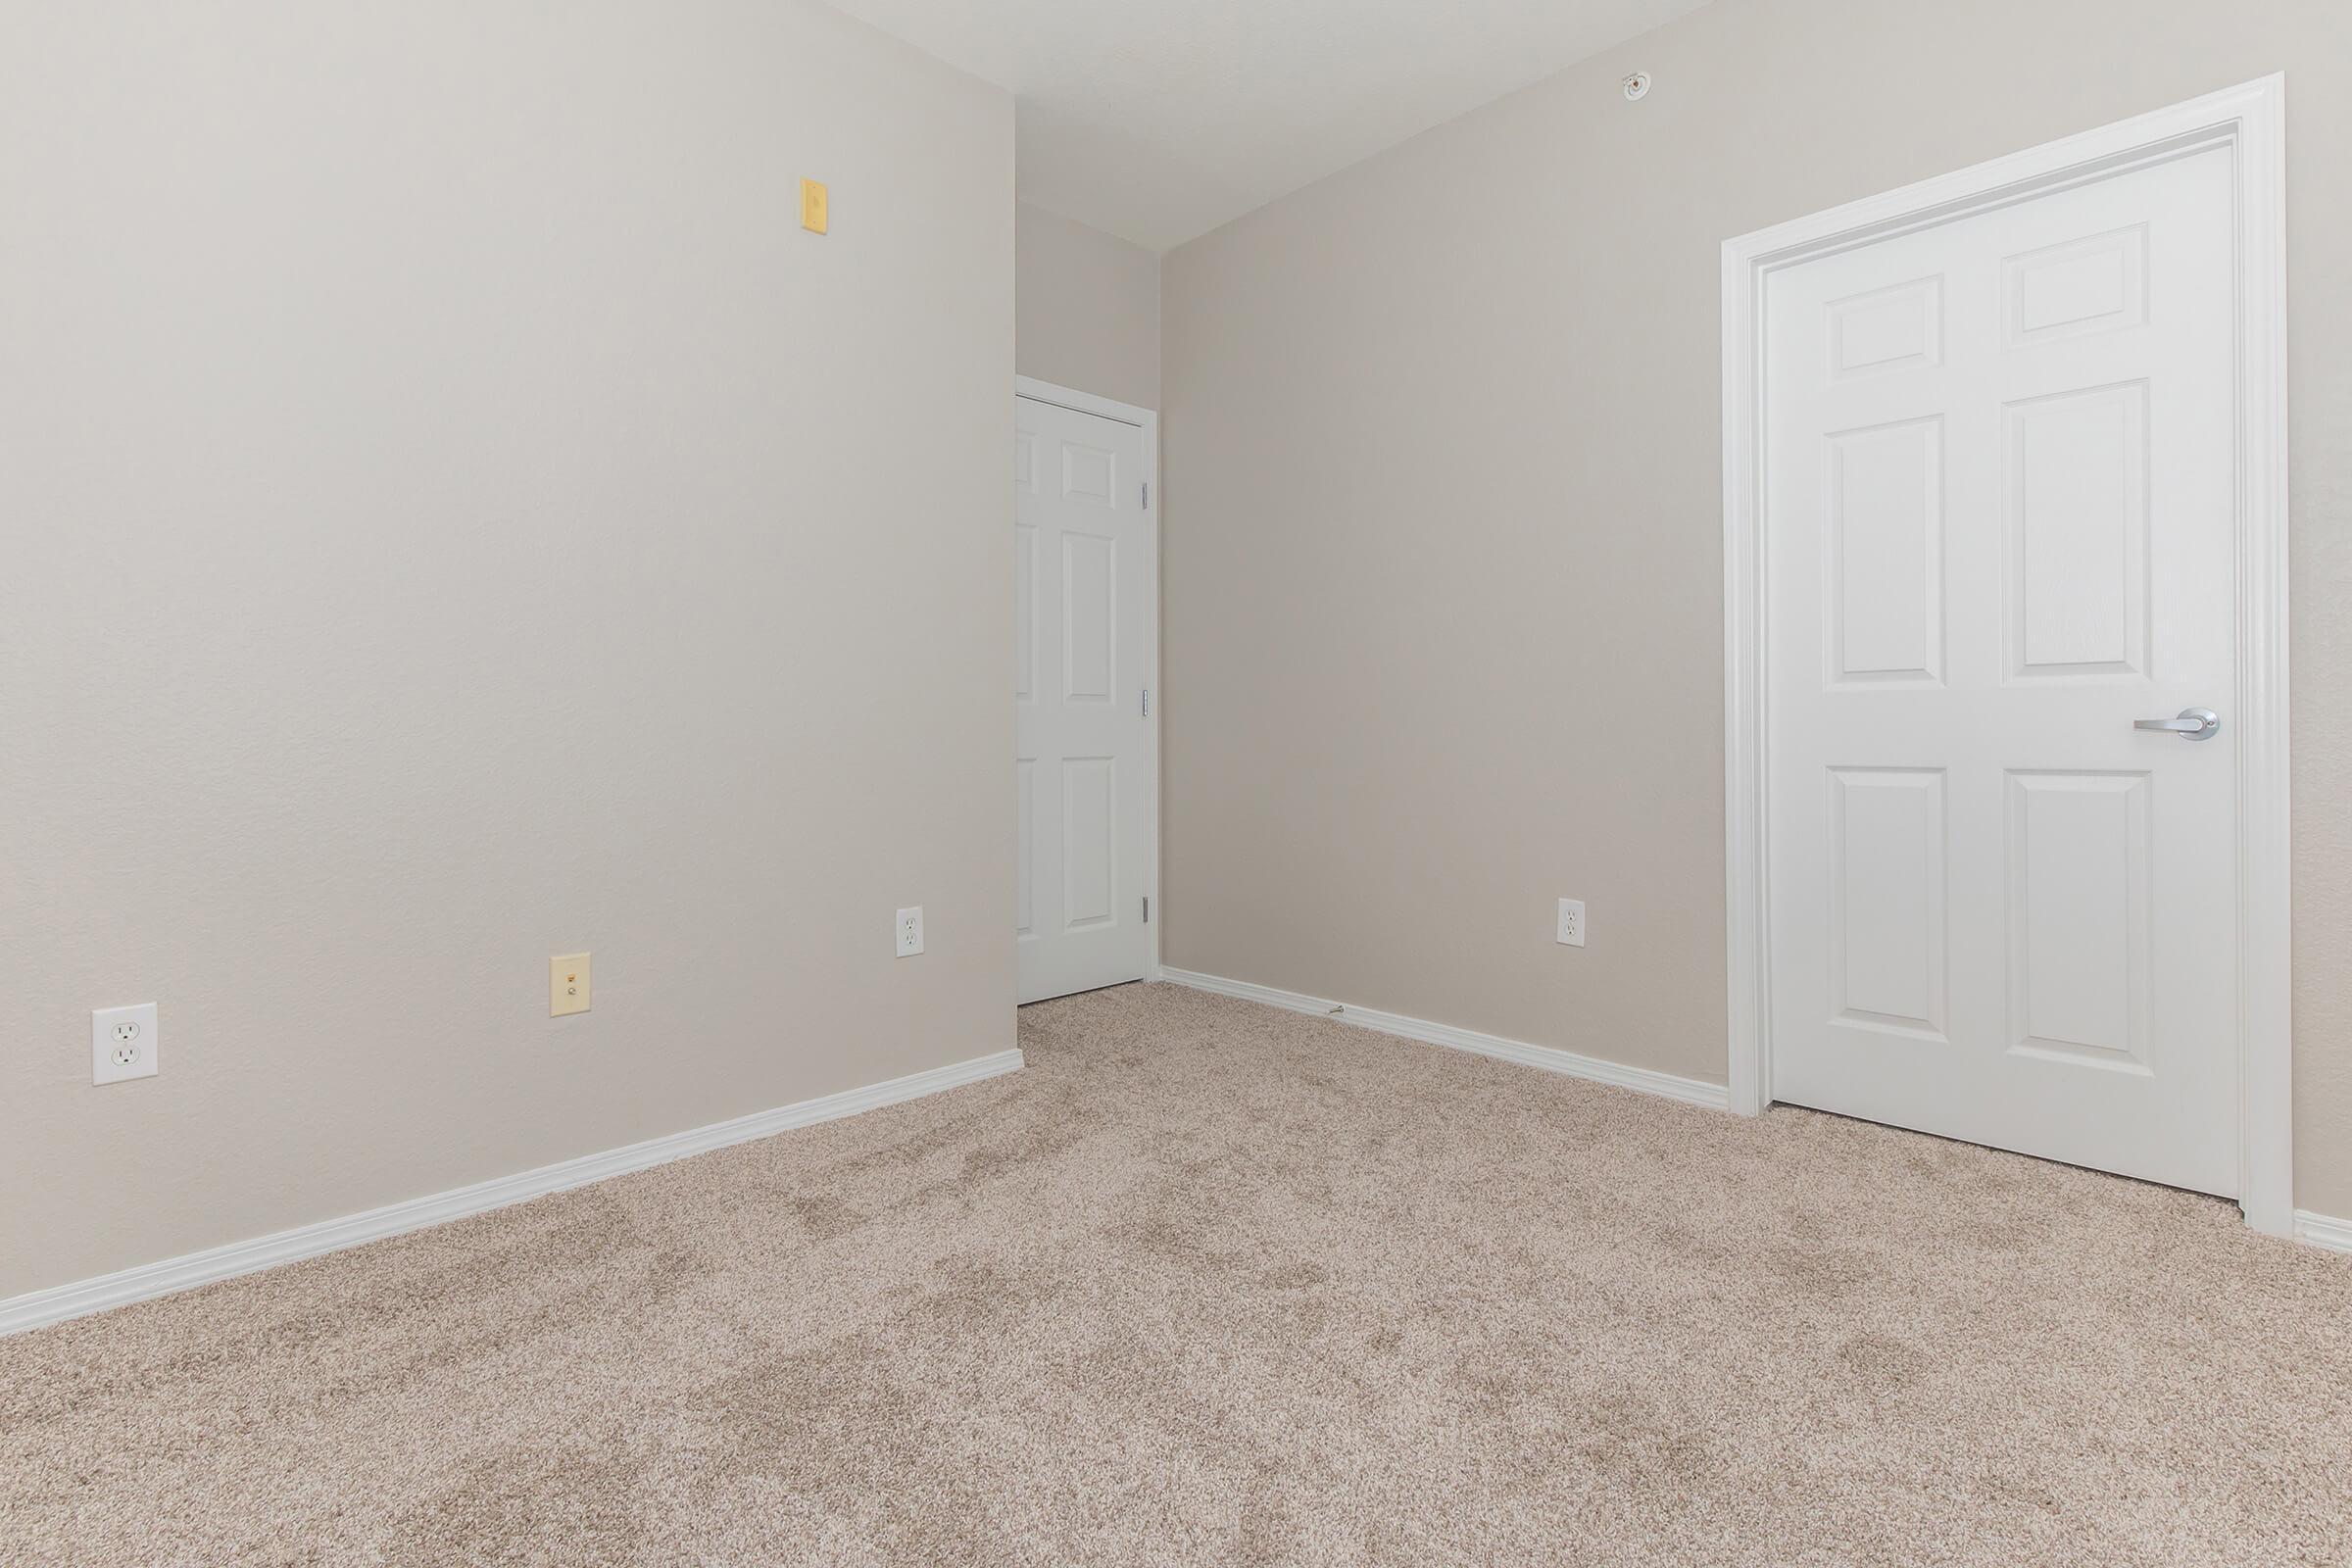 TWO BEDROOM APARTMENTS FOR RENT IN ARVADA, COLORADO